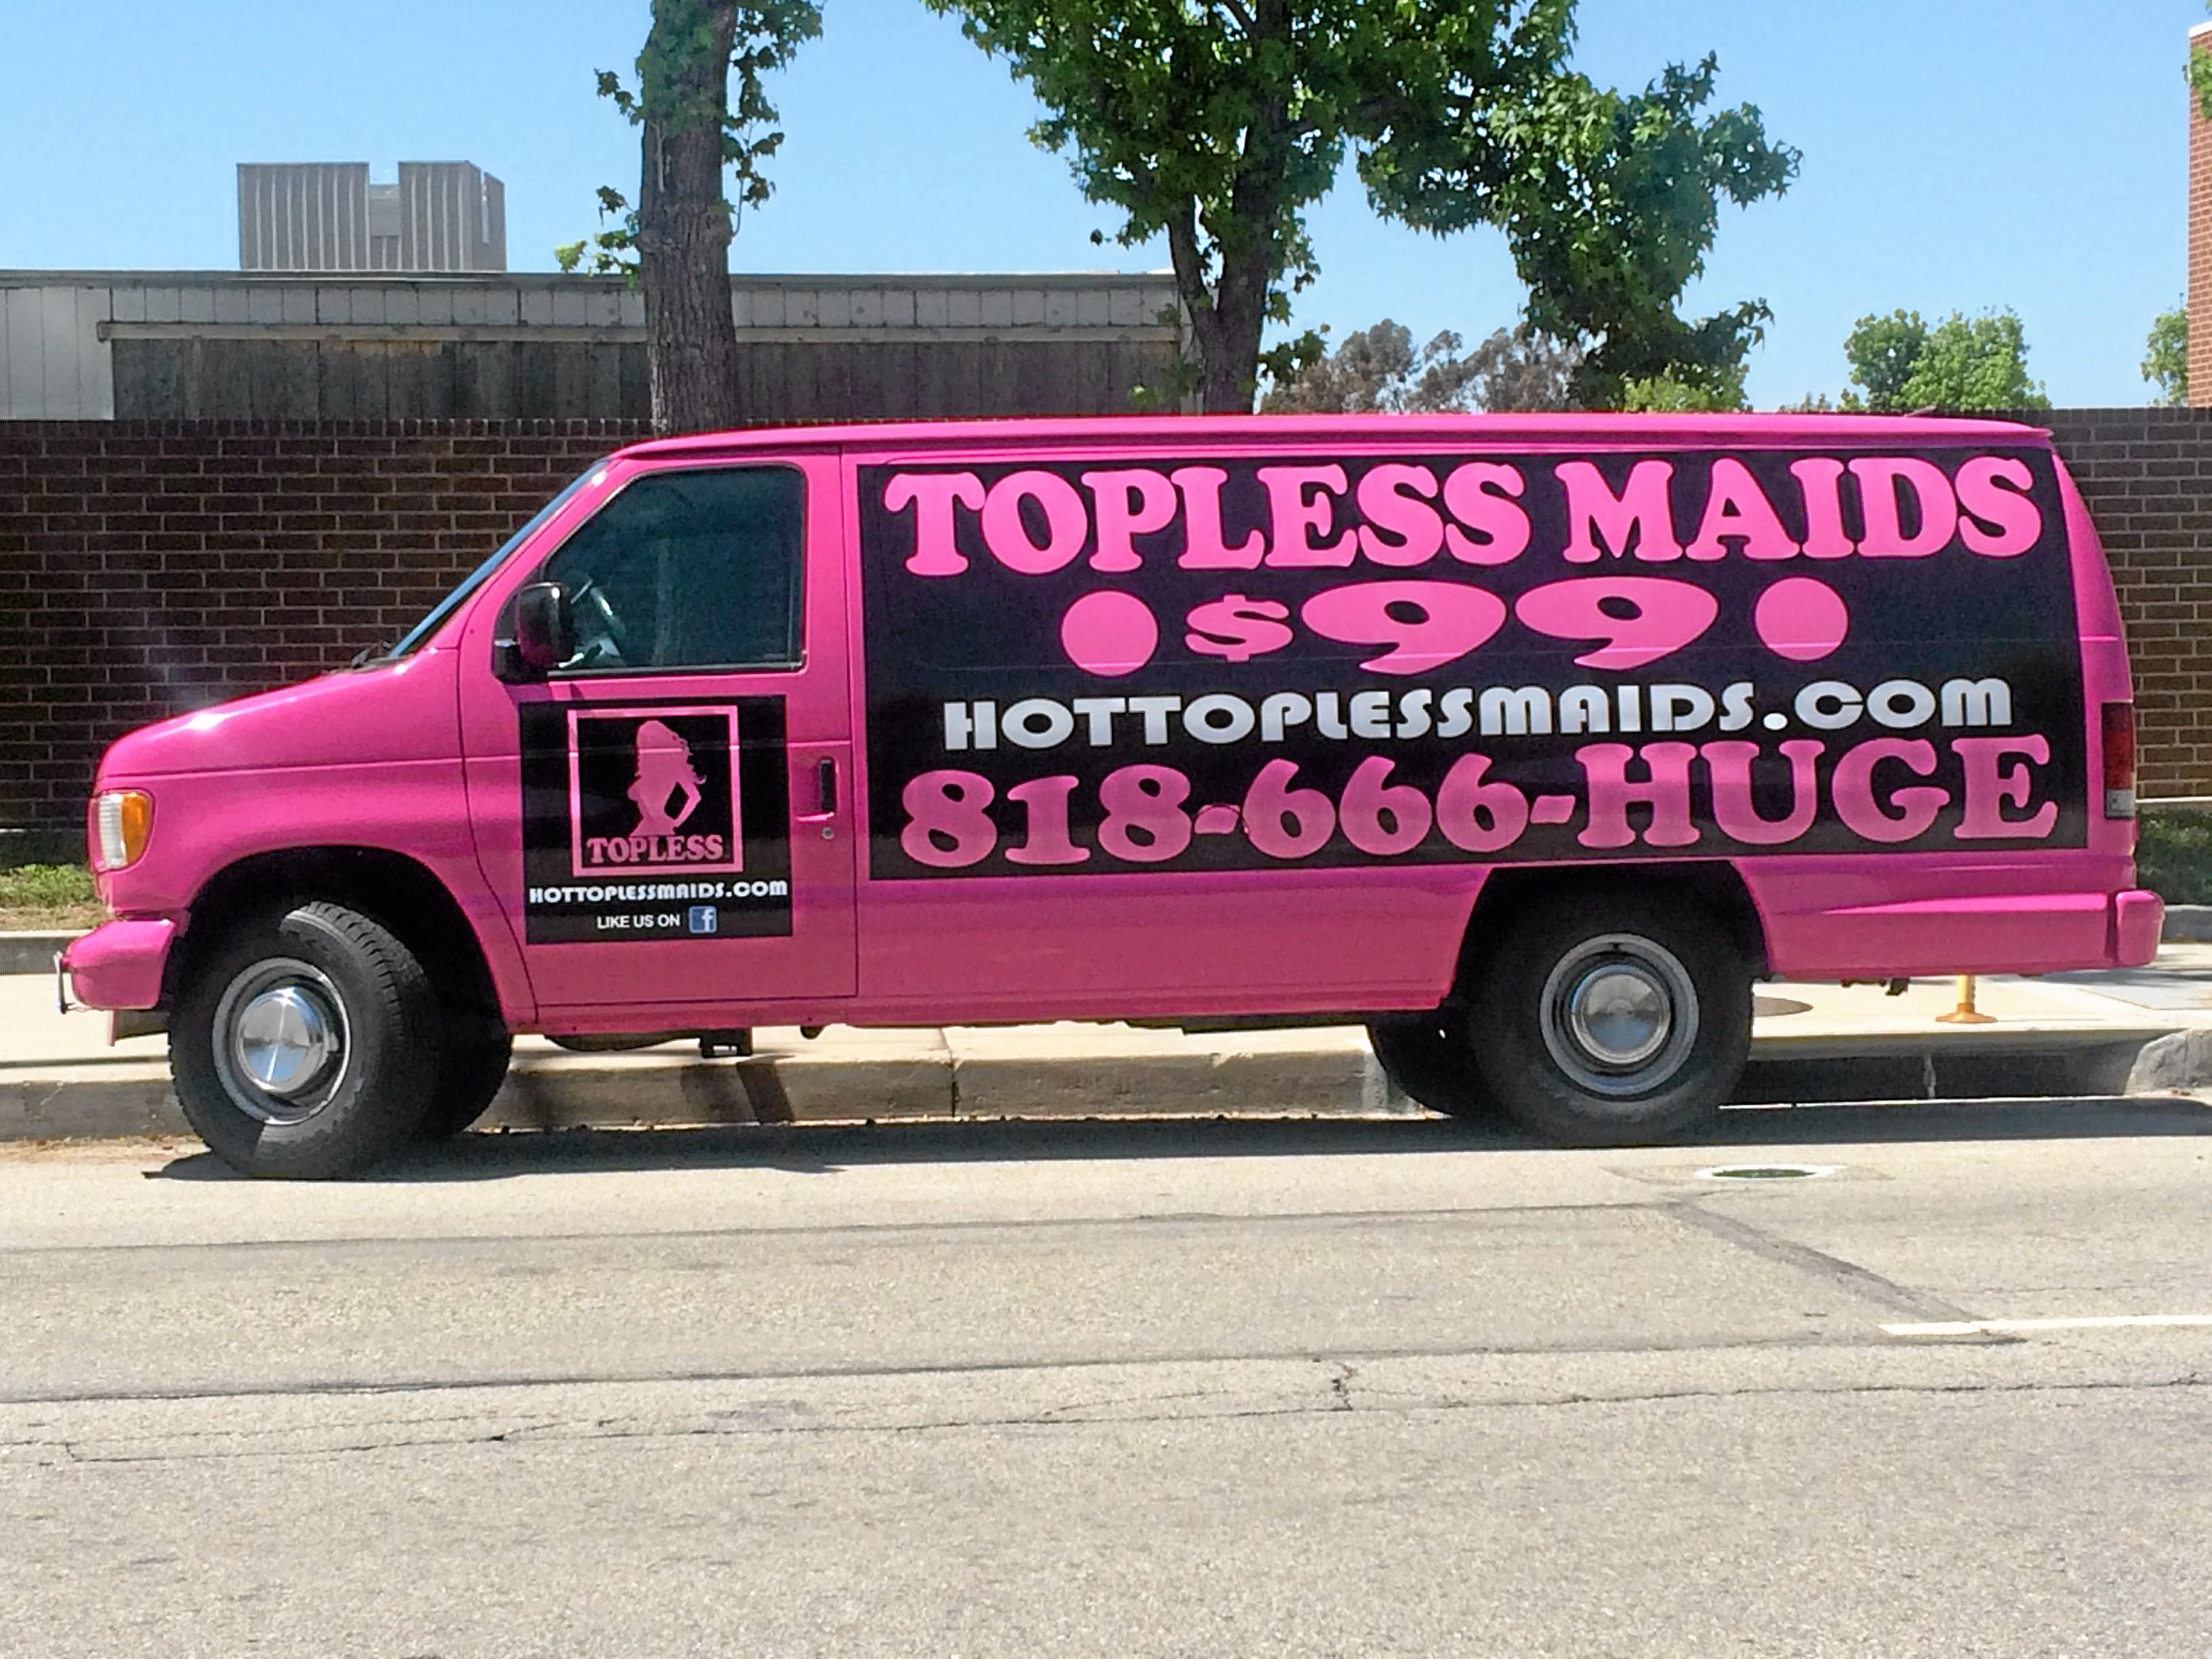 Topless maids los angeles